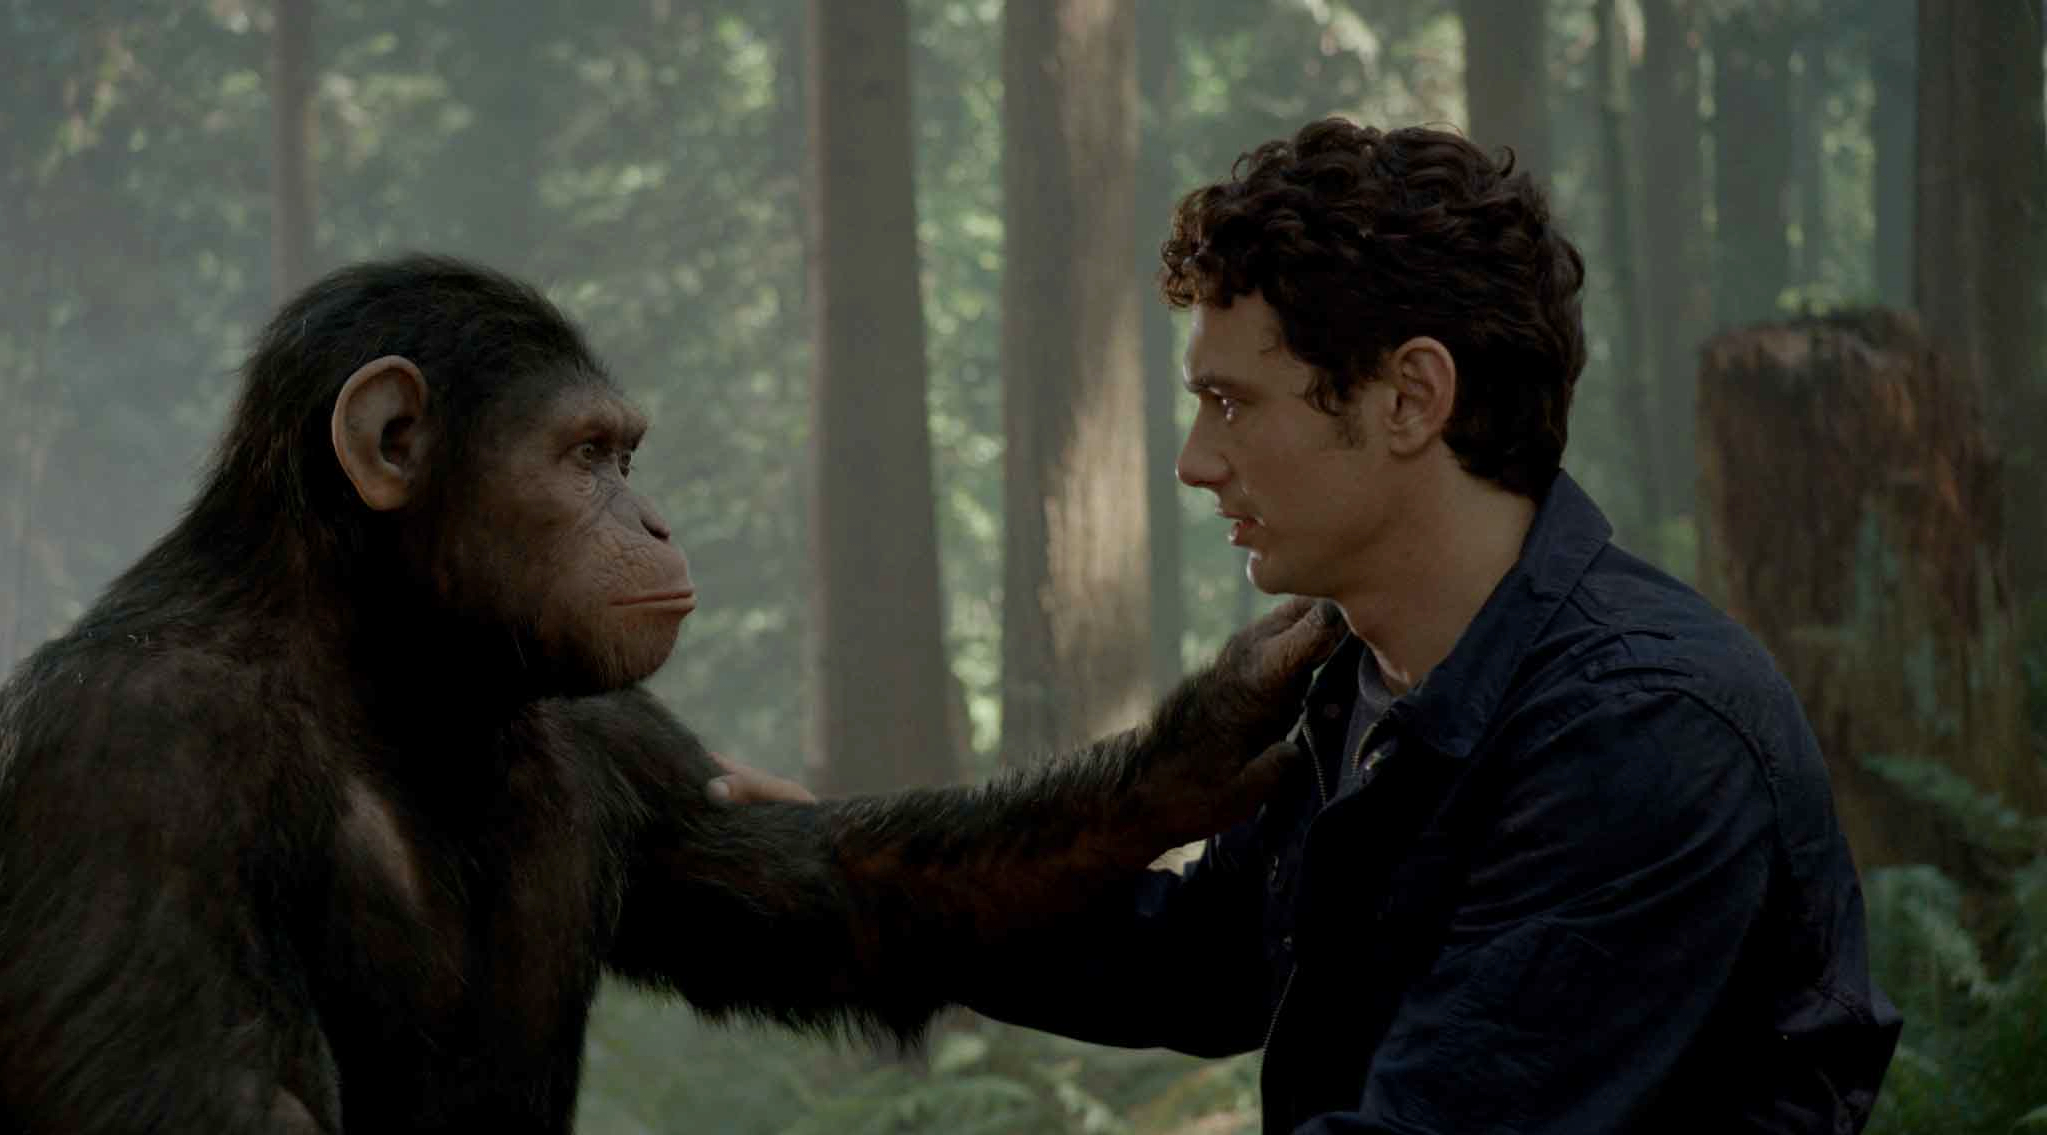 5. Rise of the Planet of the Apes (2011) - Incredible Motion Capture